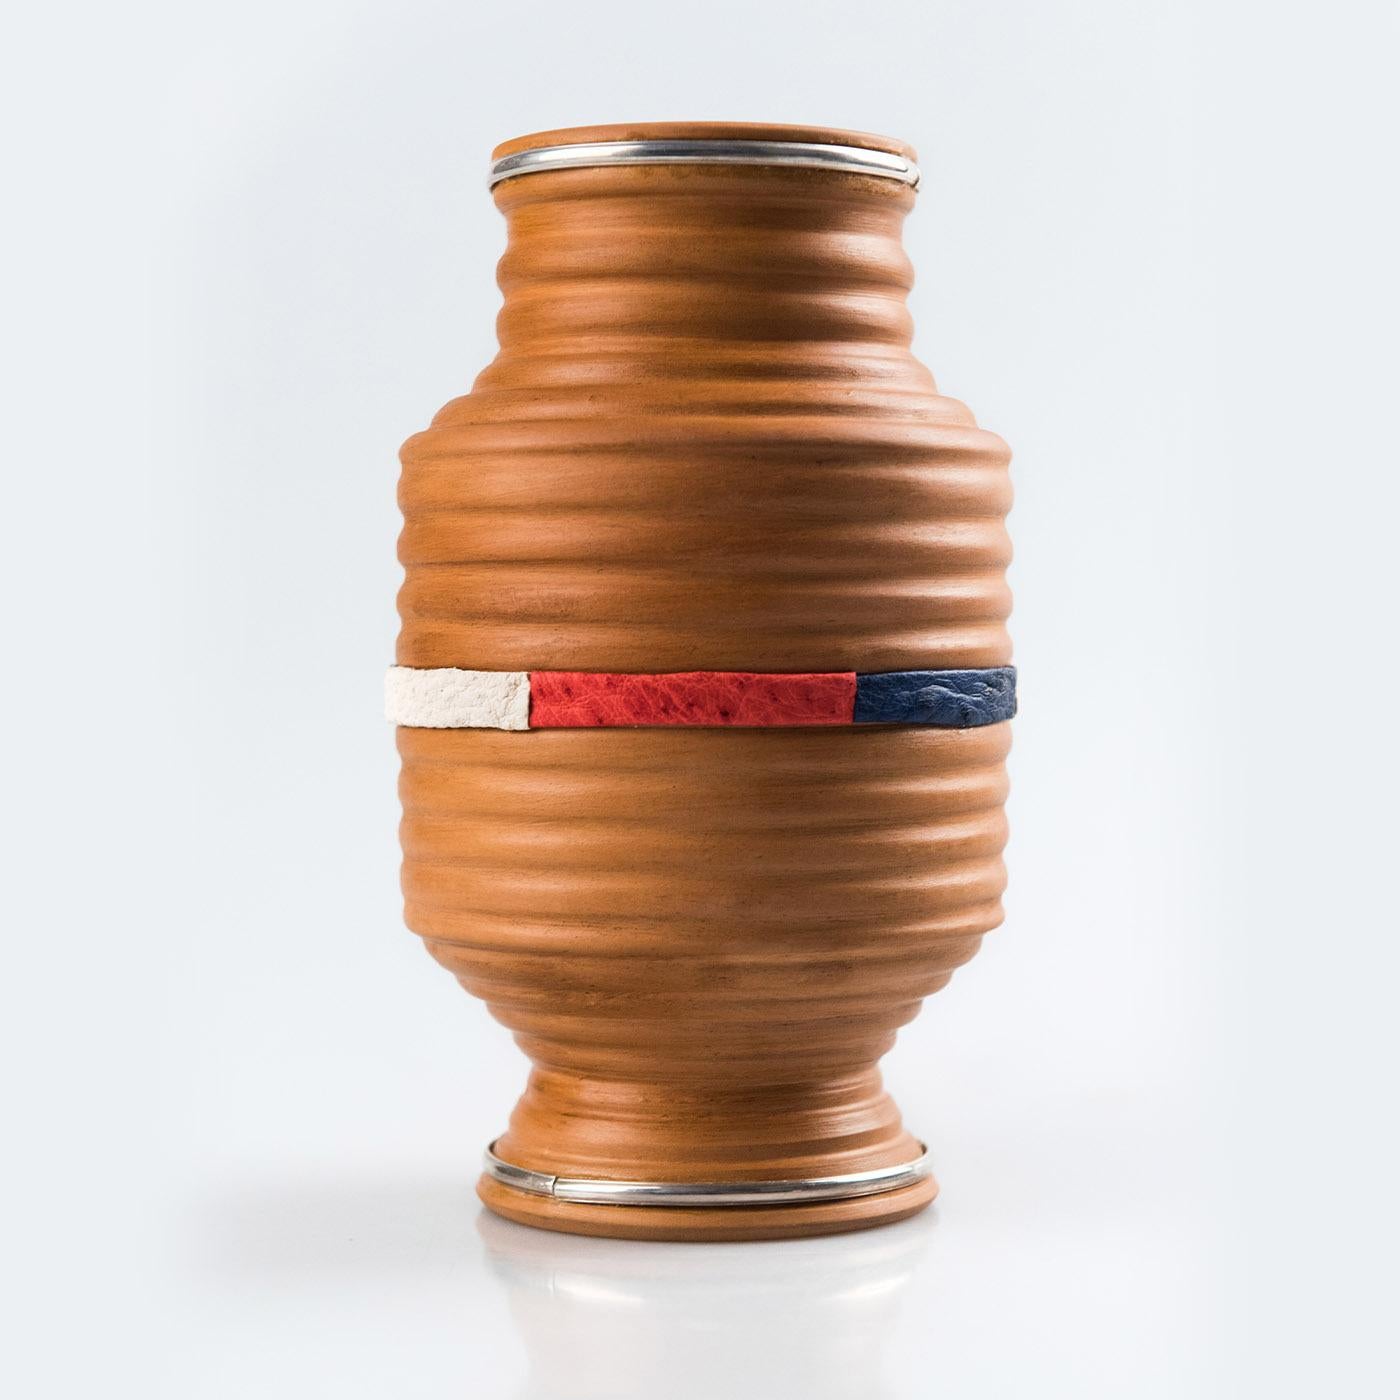 A sublime display of traditional craftsmanship, this stunning vase is deftly handmade of first-rate materials using time-old techniques from the Italian artisanal tradition. Its sturdy and elegant silhouette is outlined by a series of concentric